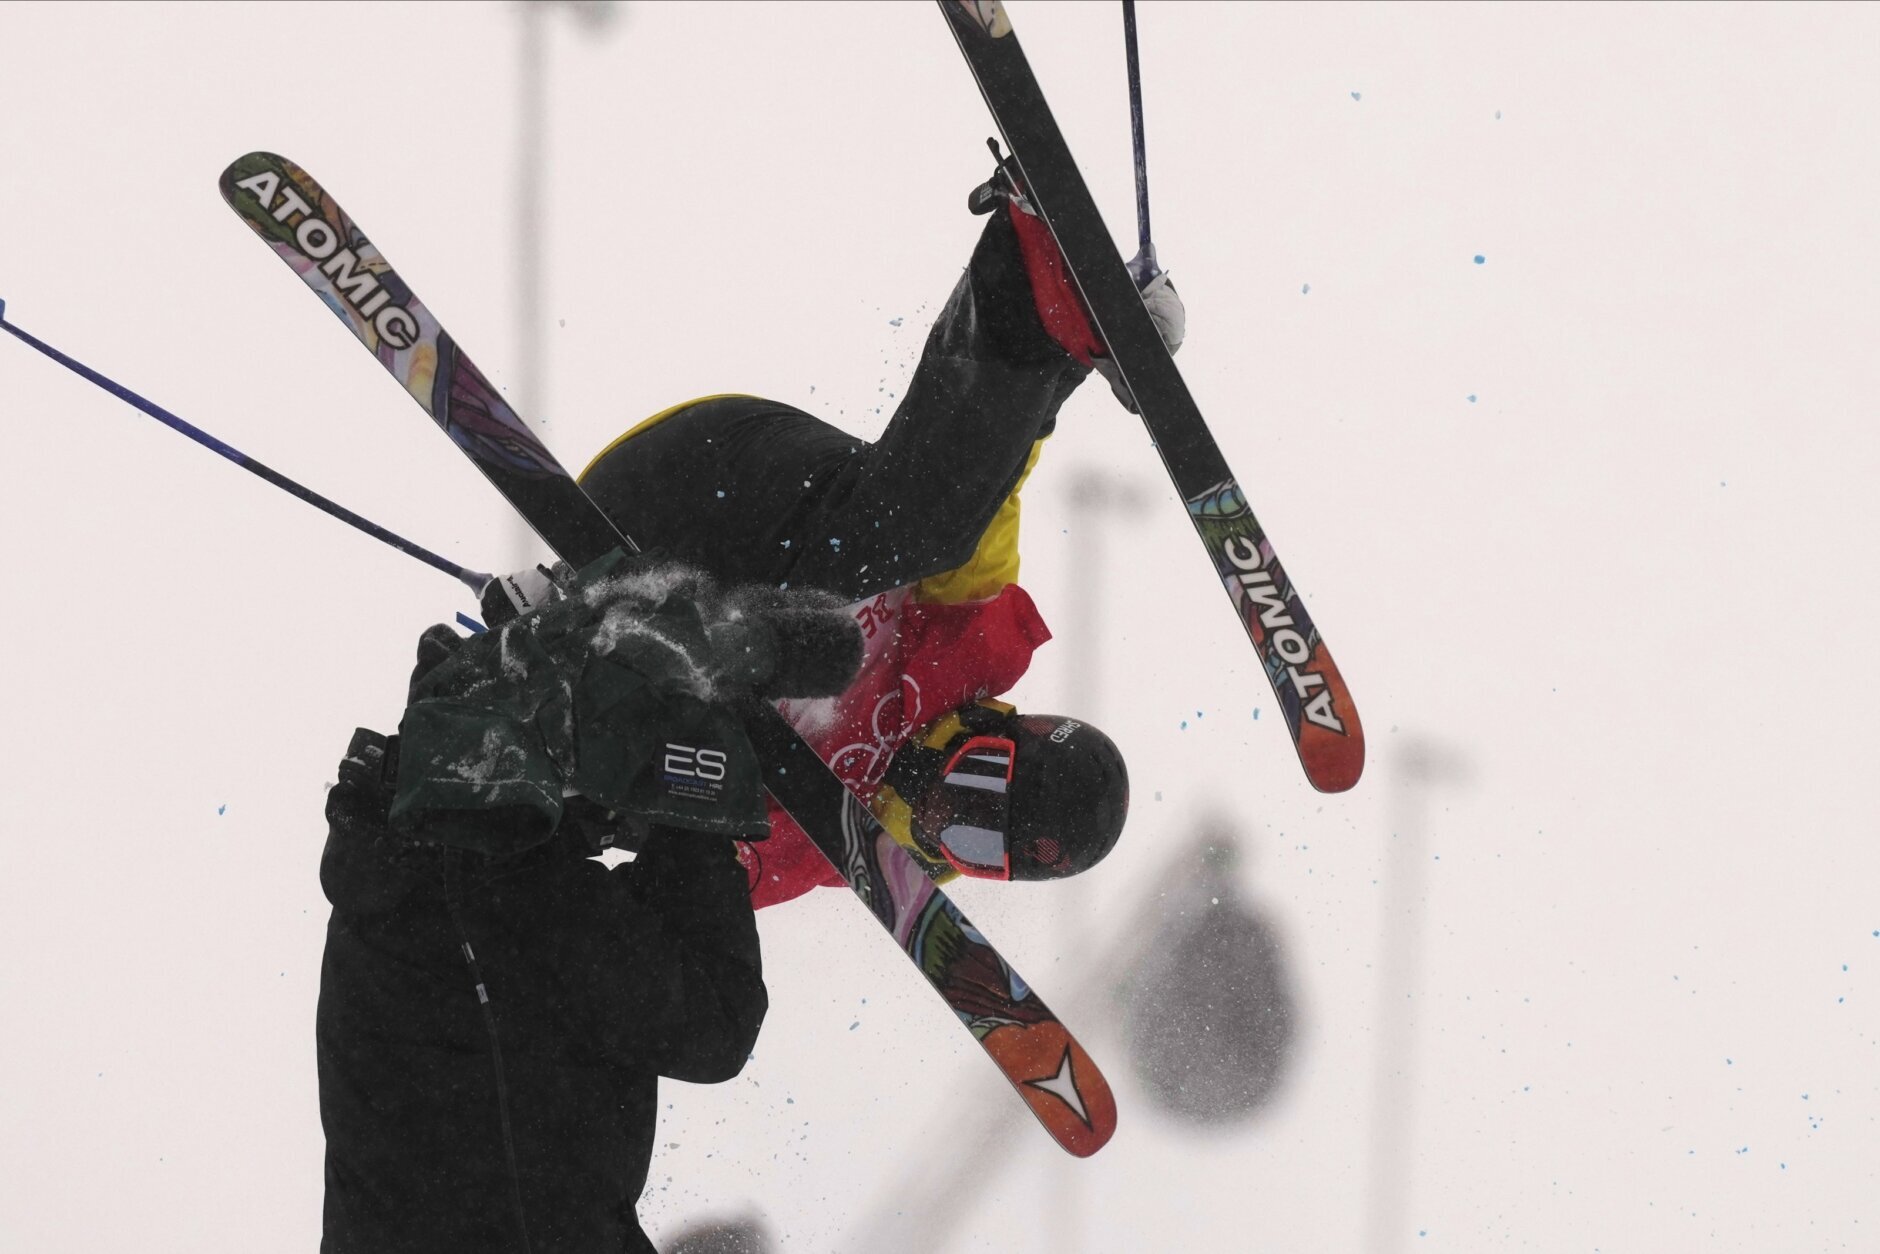 <p>Finland&#8217;s Jon Sallinen collides with a cameraman during the men&#8217;s halfpipe qualification at the 2022 Winter Olympics, Thursday, Feb. 17, 2022, in Zhangjiakou, China.</p>
